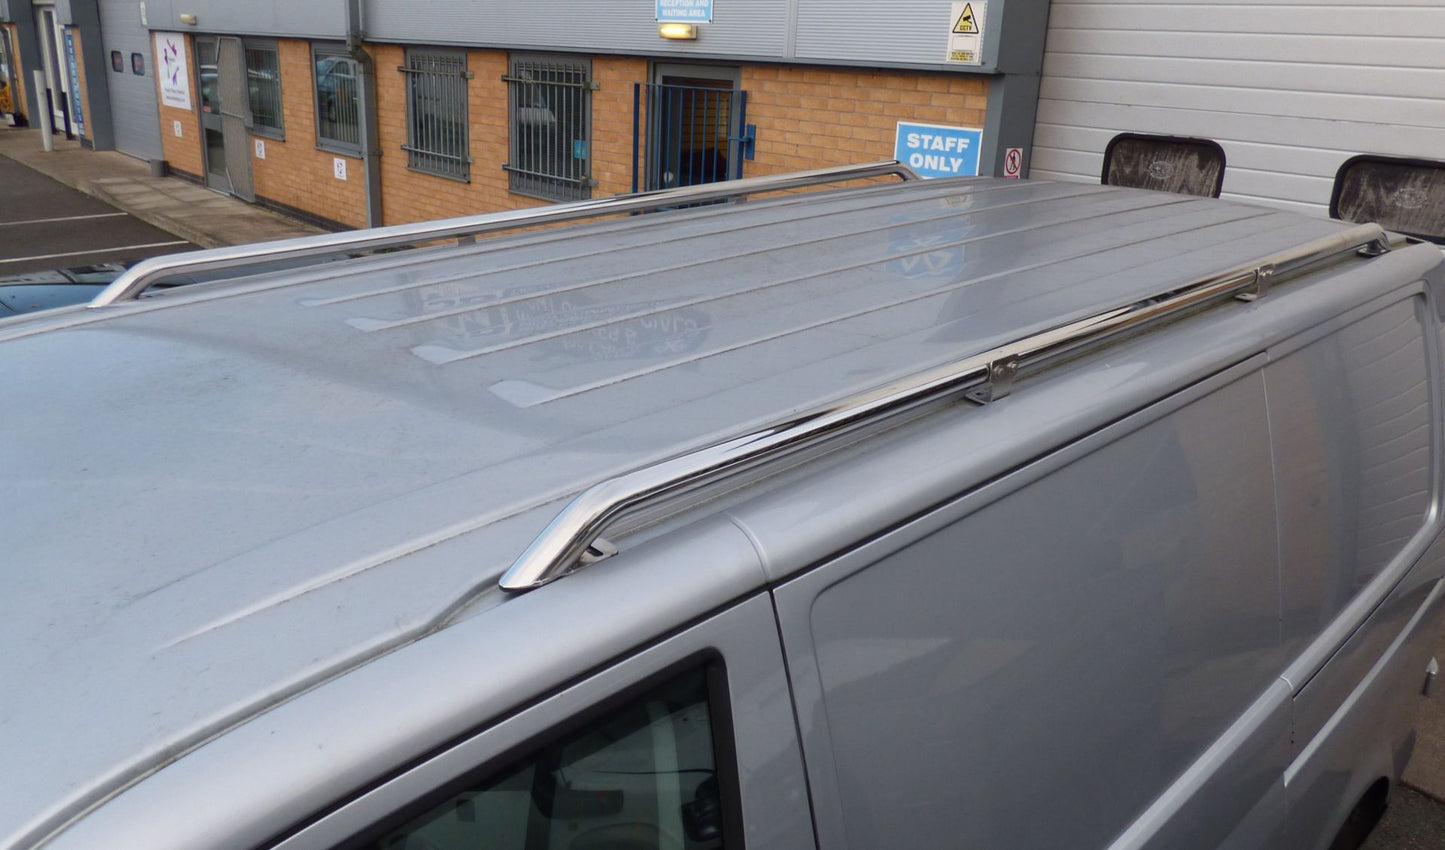 Stainless Steel OE Style Roof Rails for the Volkswagen Transporter T5 LWB -  - sold by Direct4x4